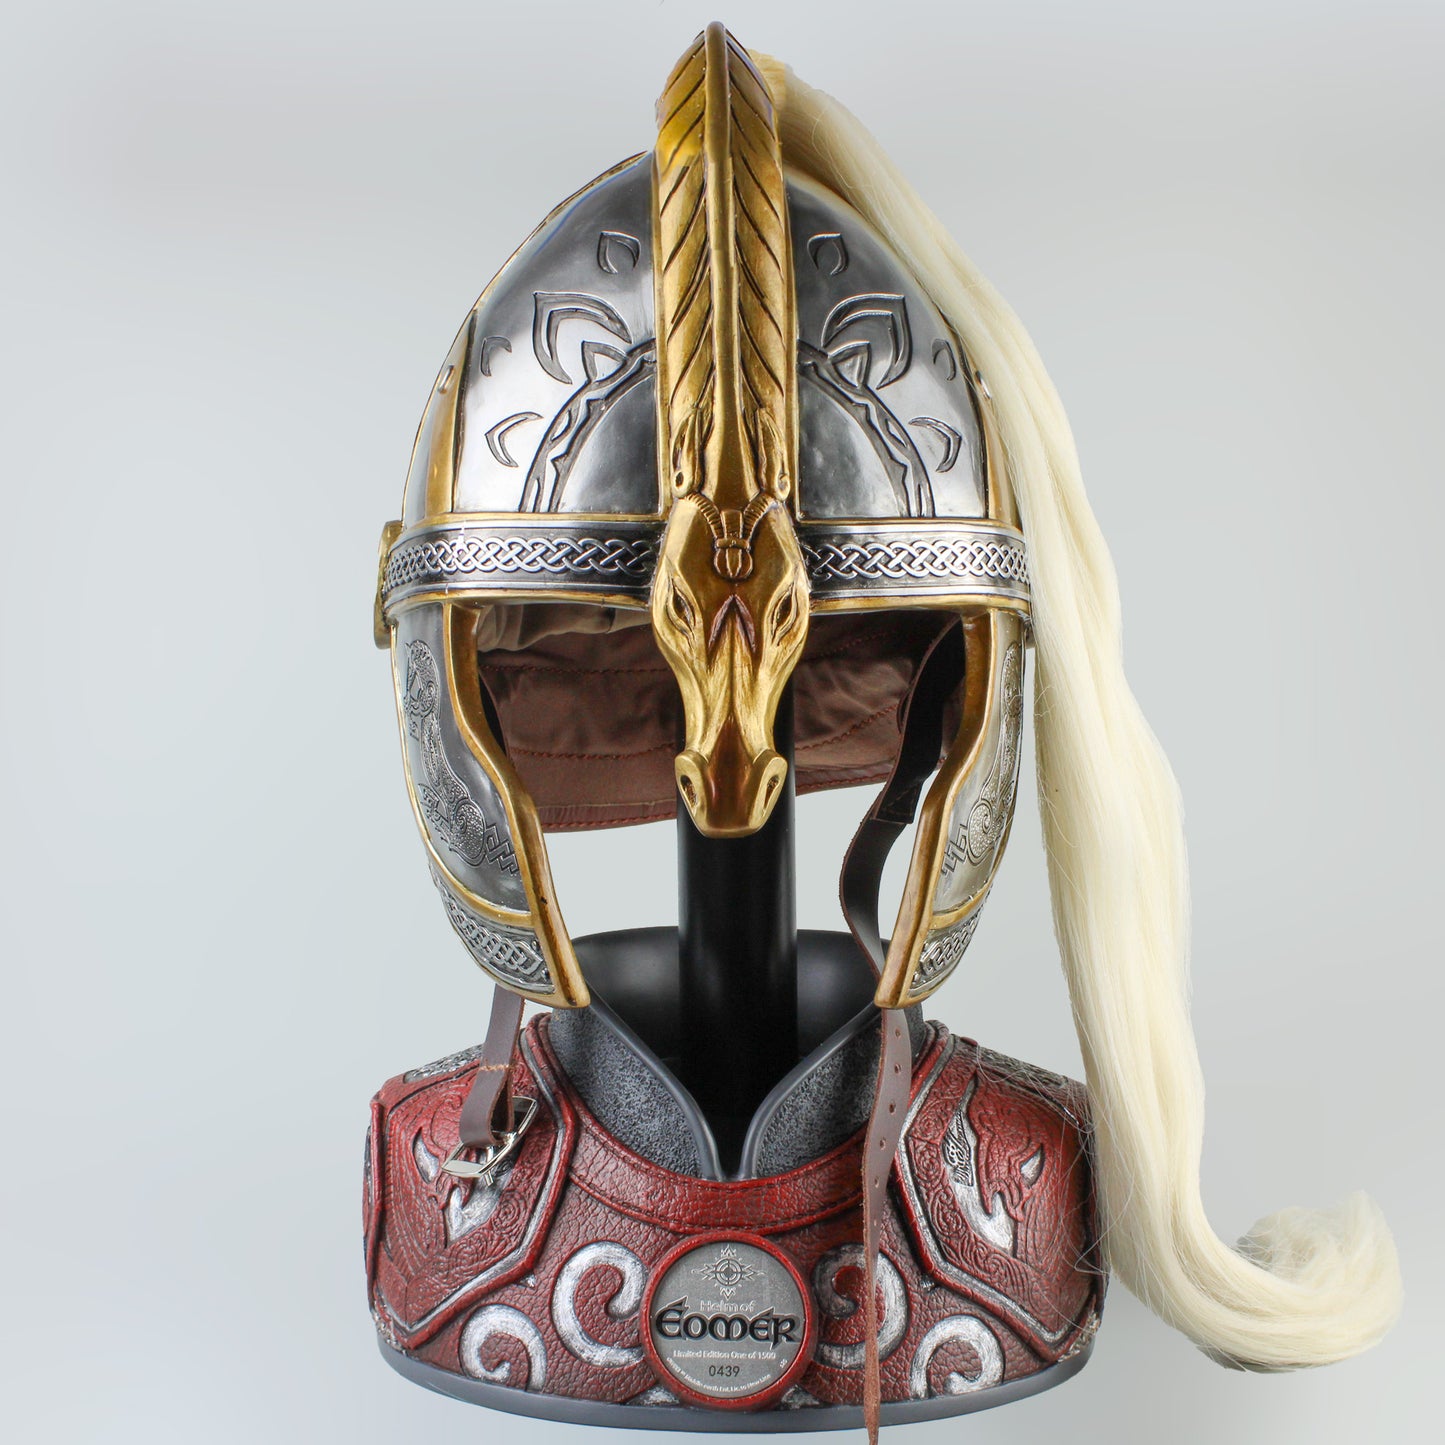 Helm Of Eomer (Lord of the Rings) Full-Scale Prop Replica with Display Stand